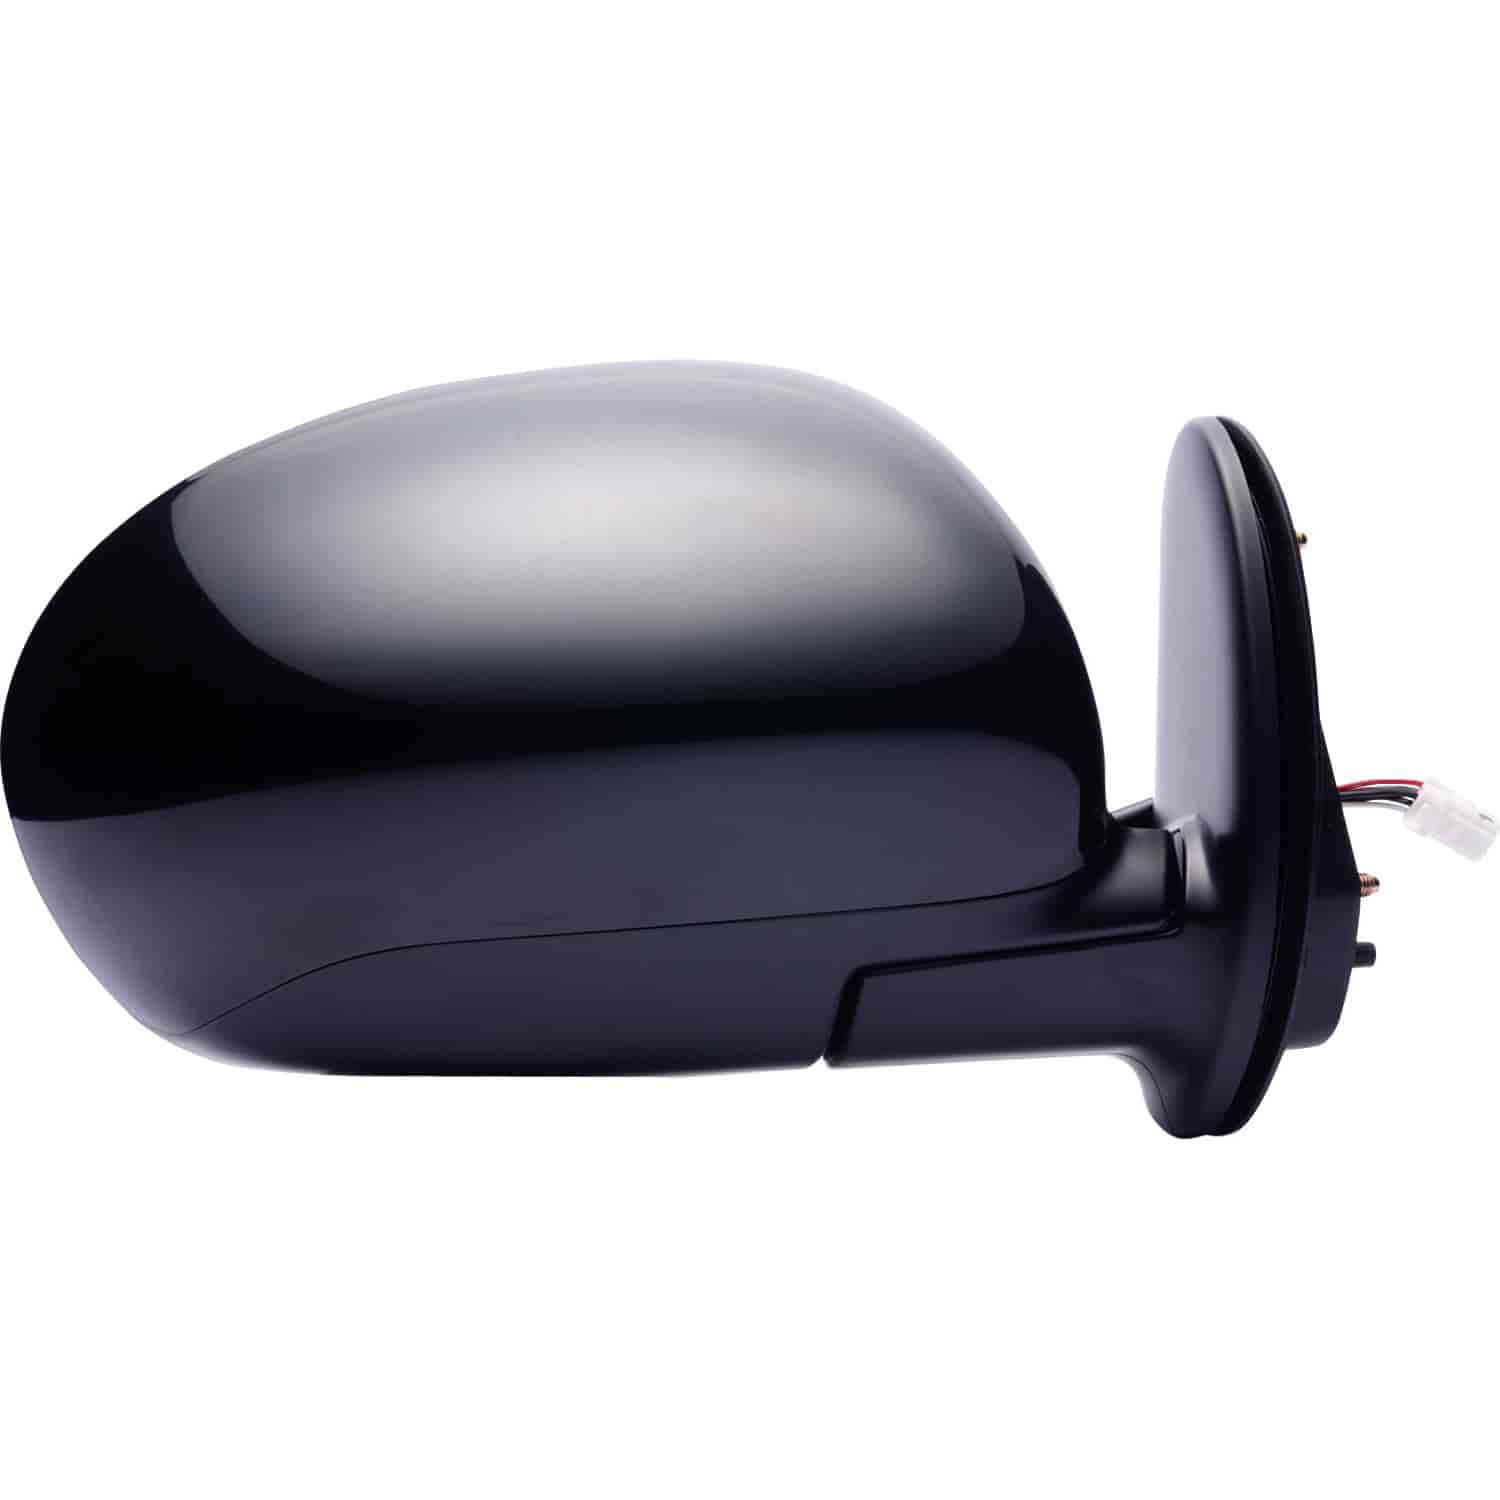 OEM Style Replacement mirror for 09-14 Nissan Cube passenger side mirror tested to fit and function